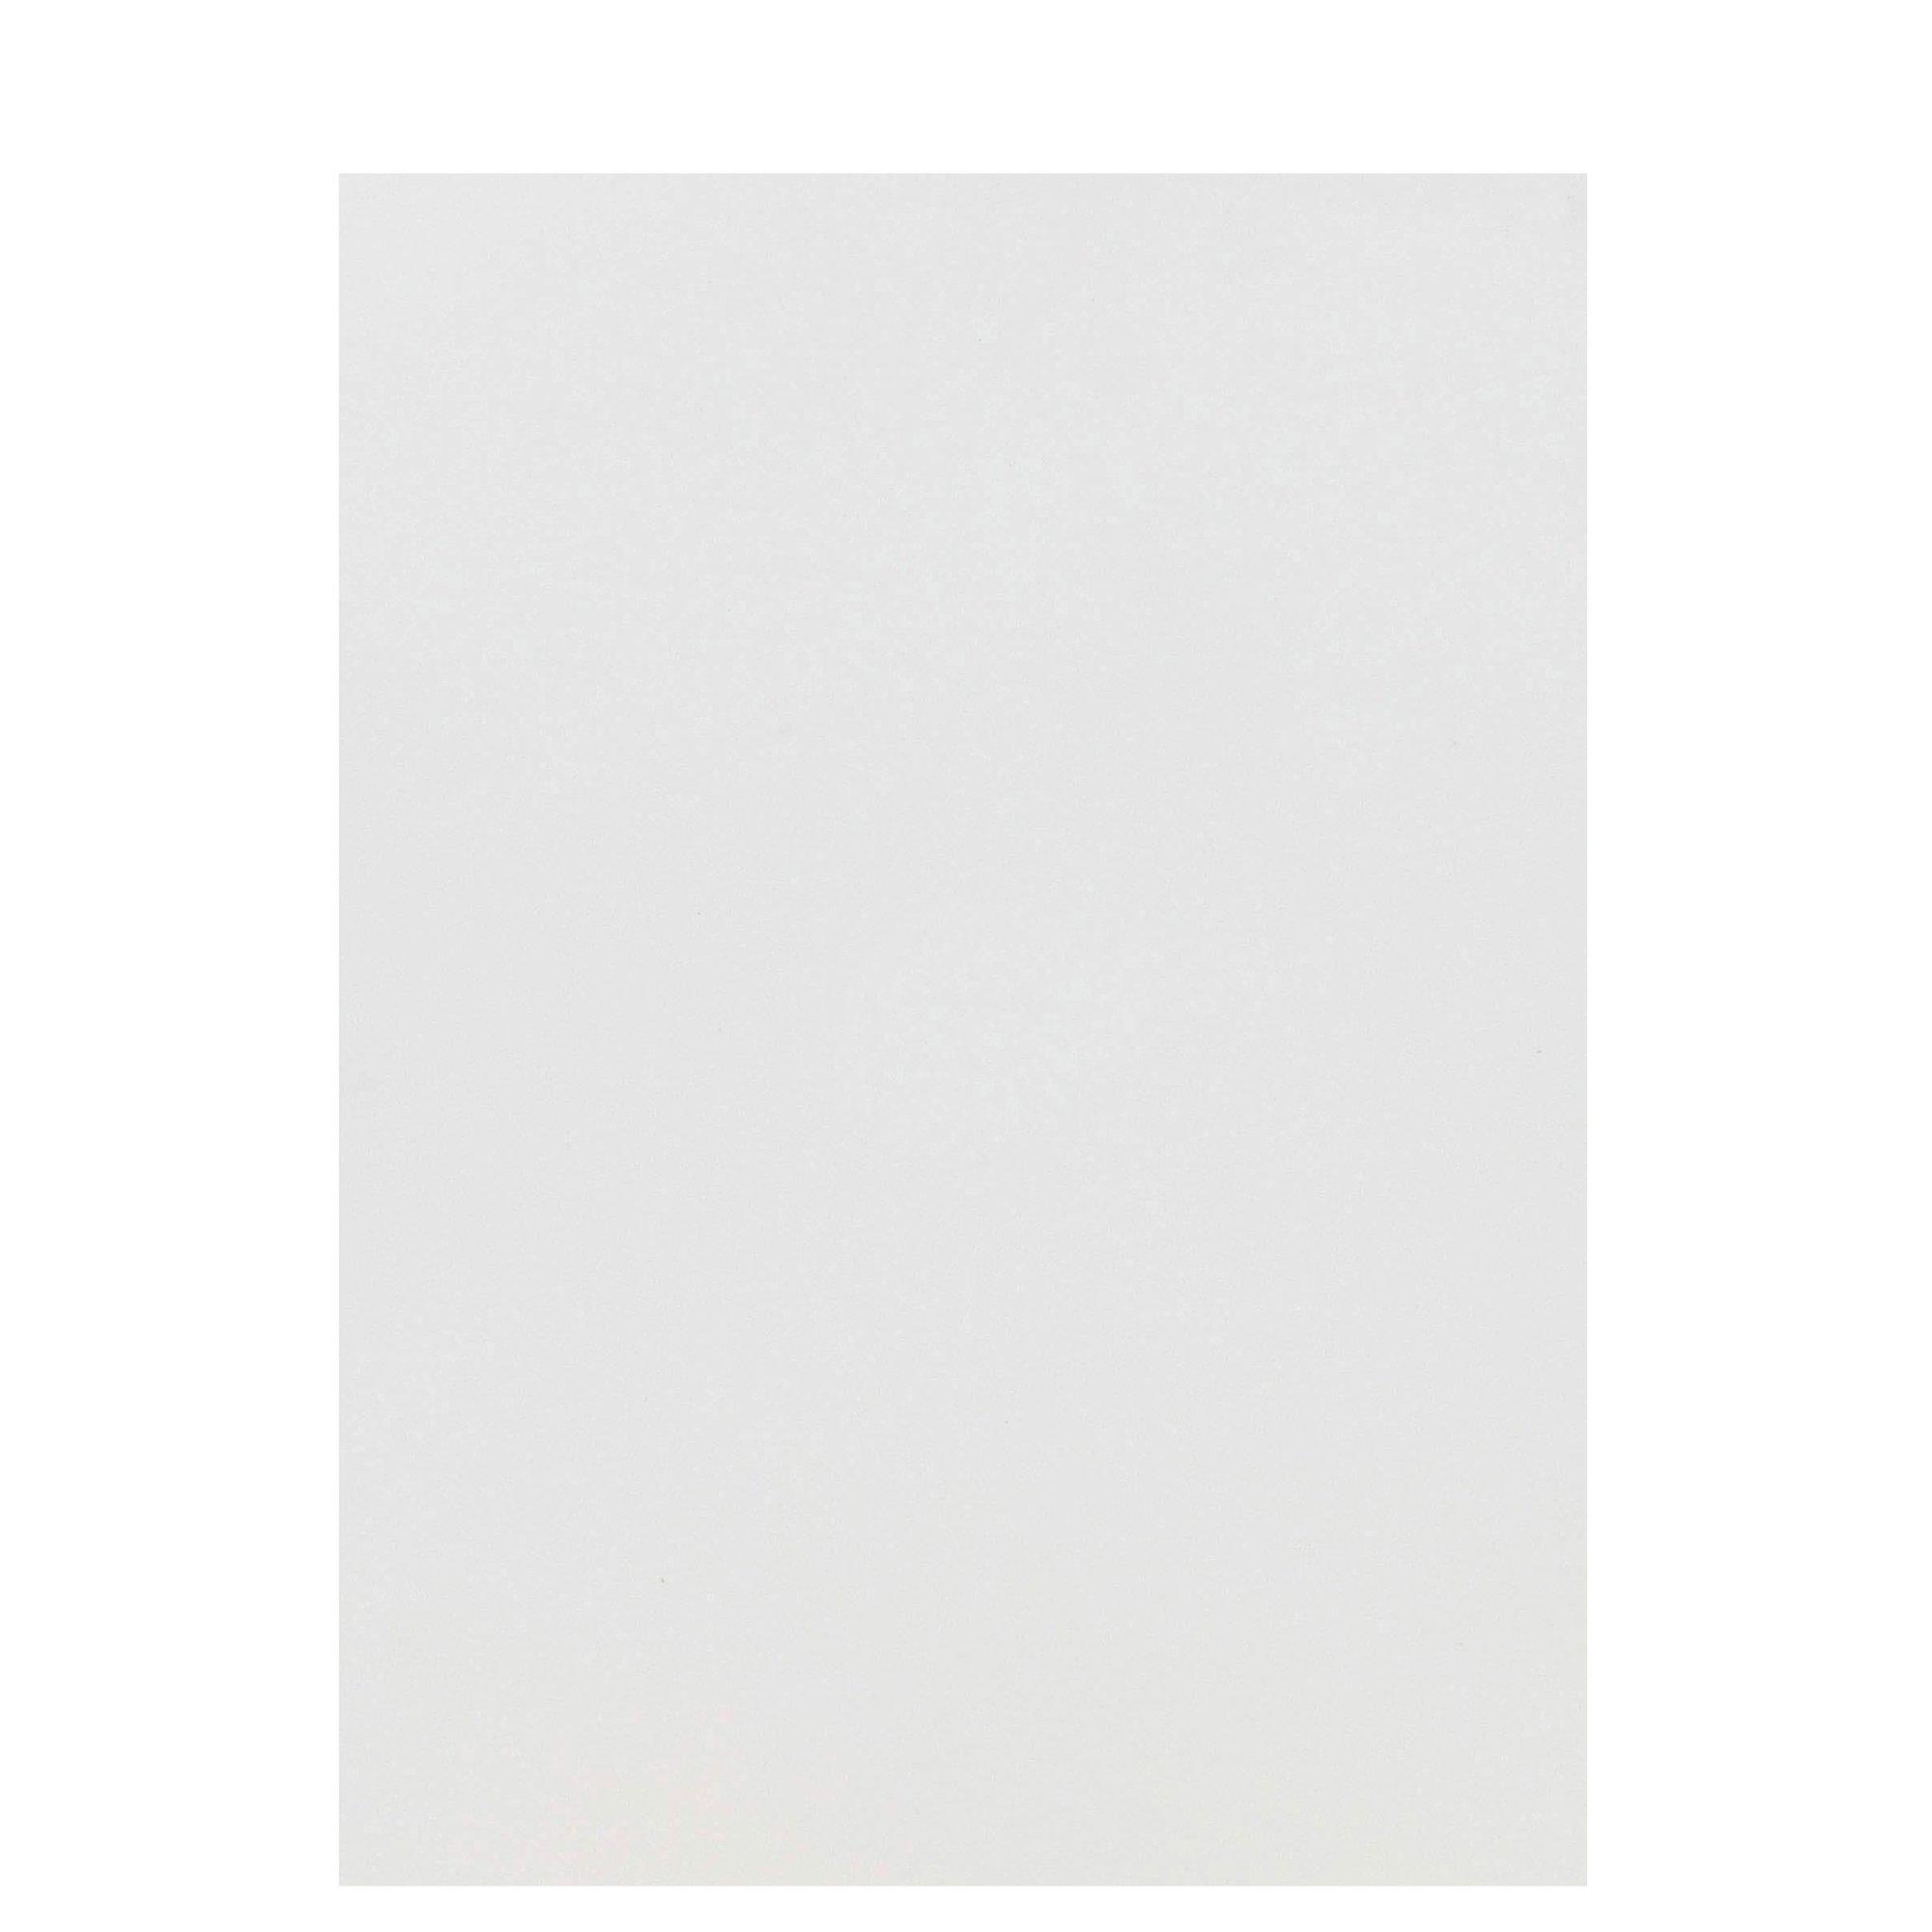 Better Crafts Black EVA Foam Sheet, 9 inch x 12 inch, 6 mm- Thick! Great  for Crafts! (1 pack)